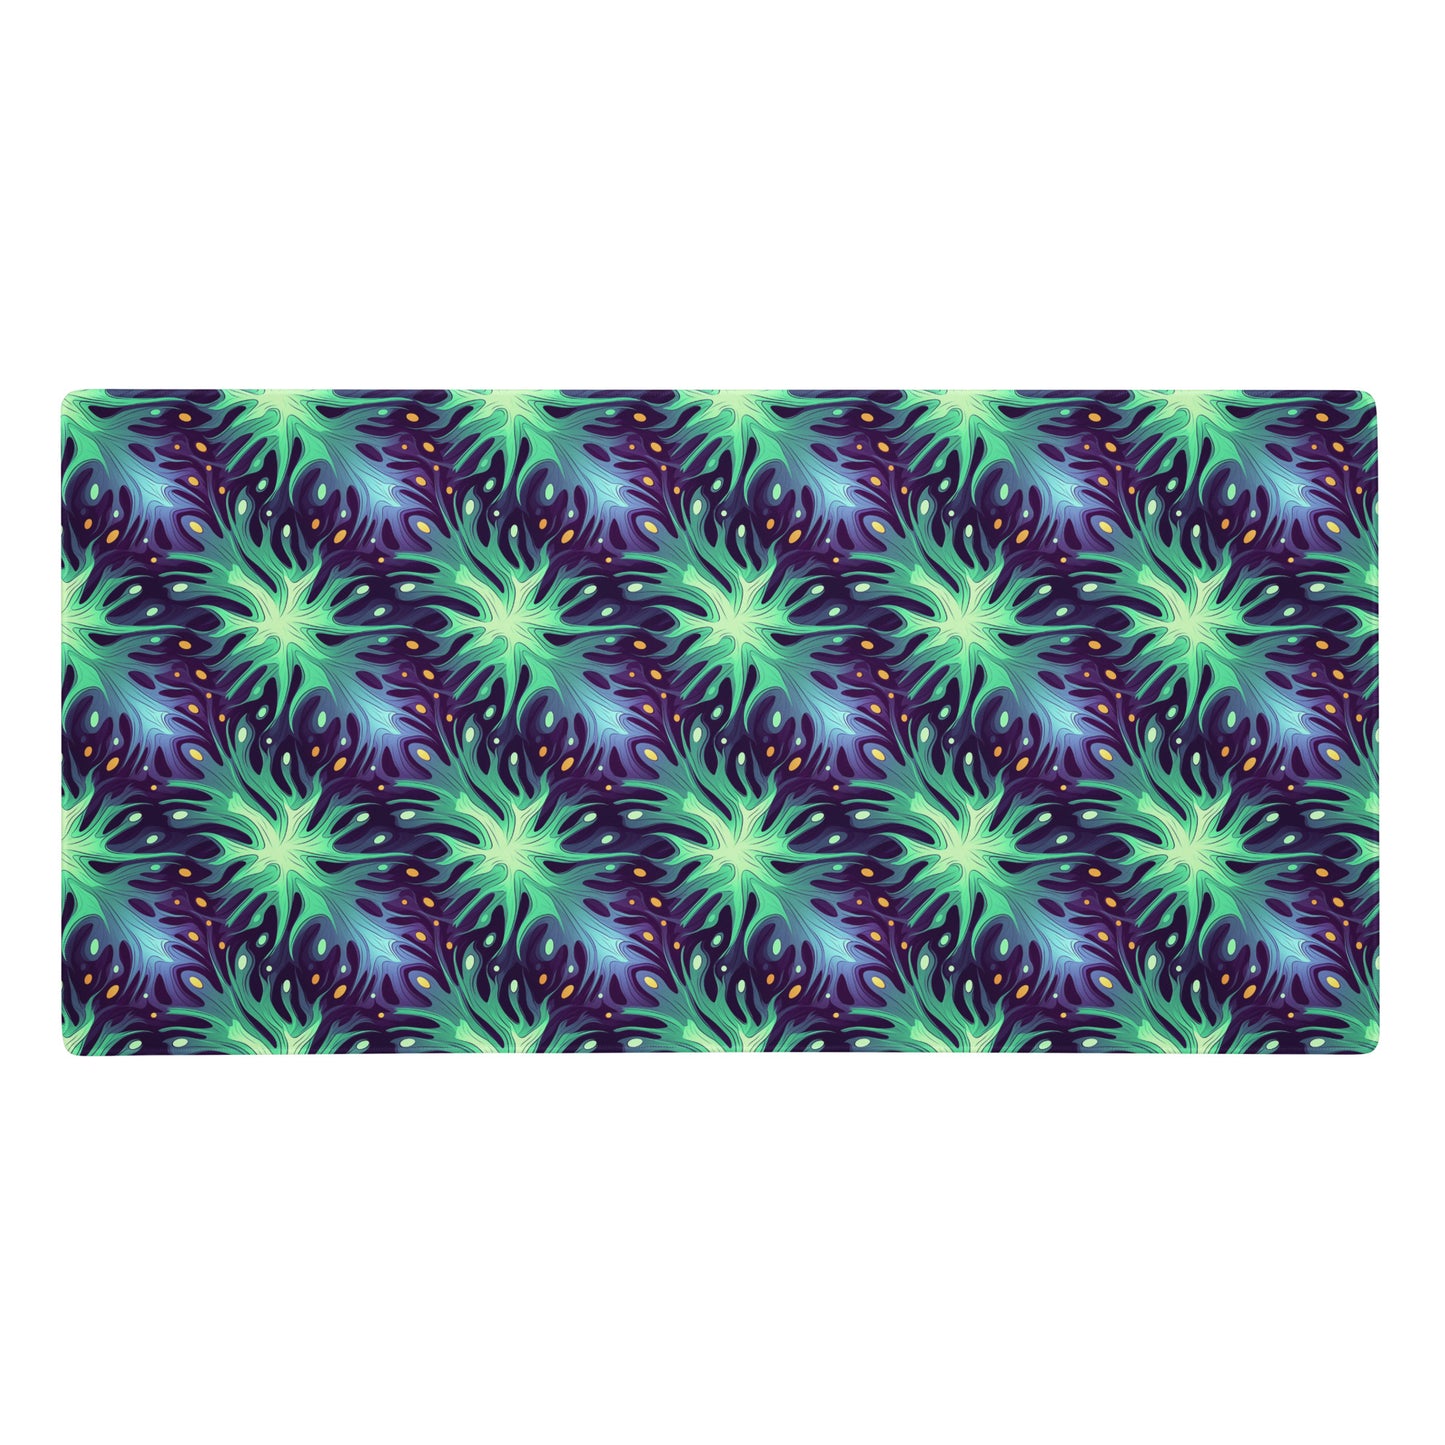 A 36" x 18" desk pad with a green and blue abstract pattern.